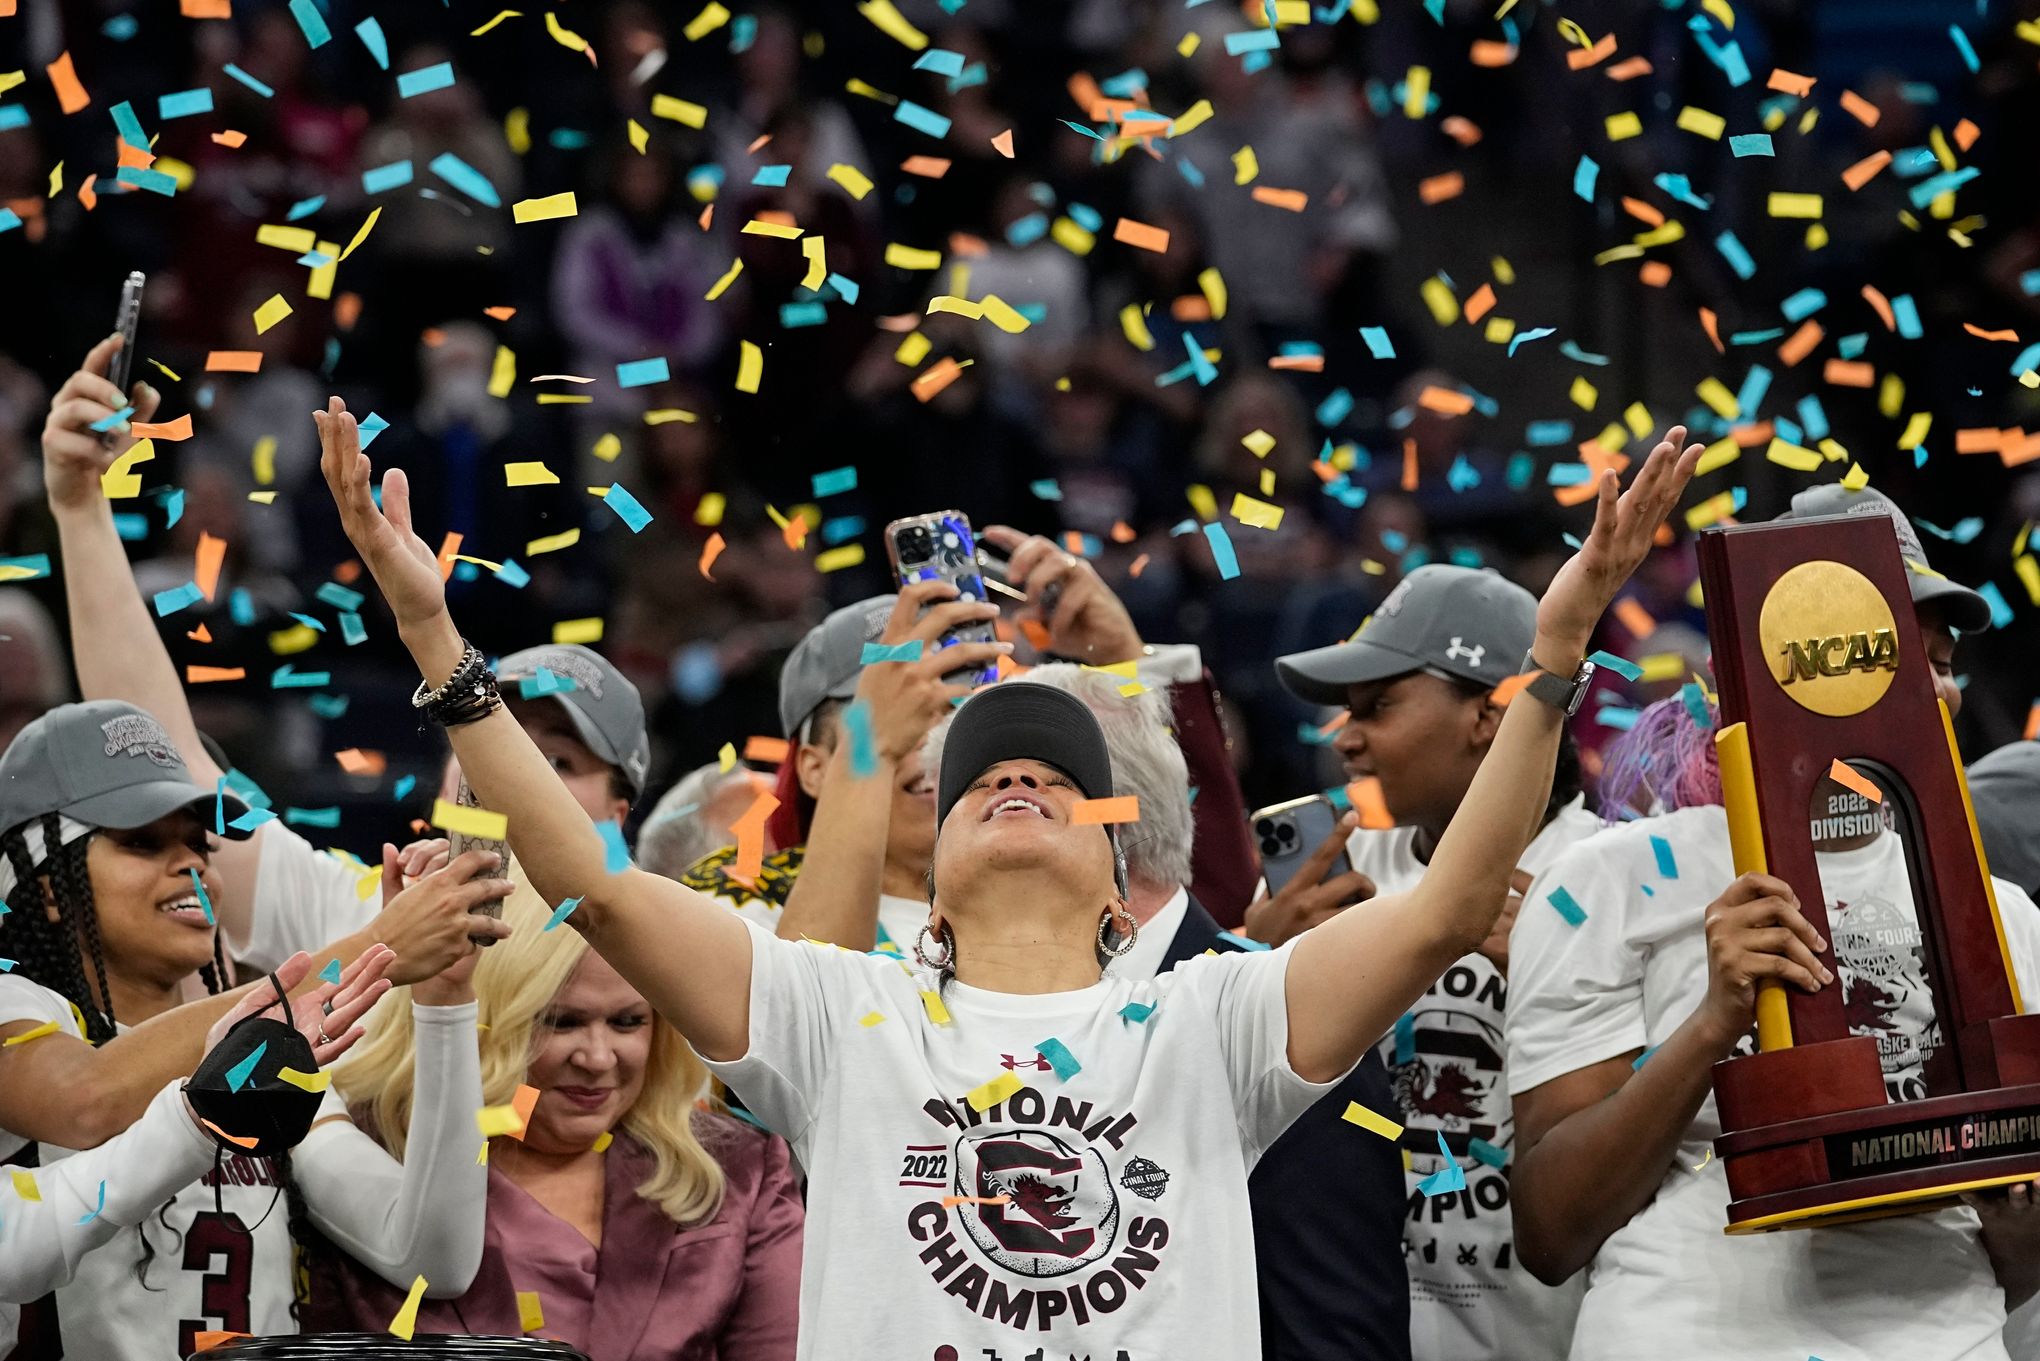 Wome's basketball news: Dawn Staley: 'I don't have any interest